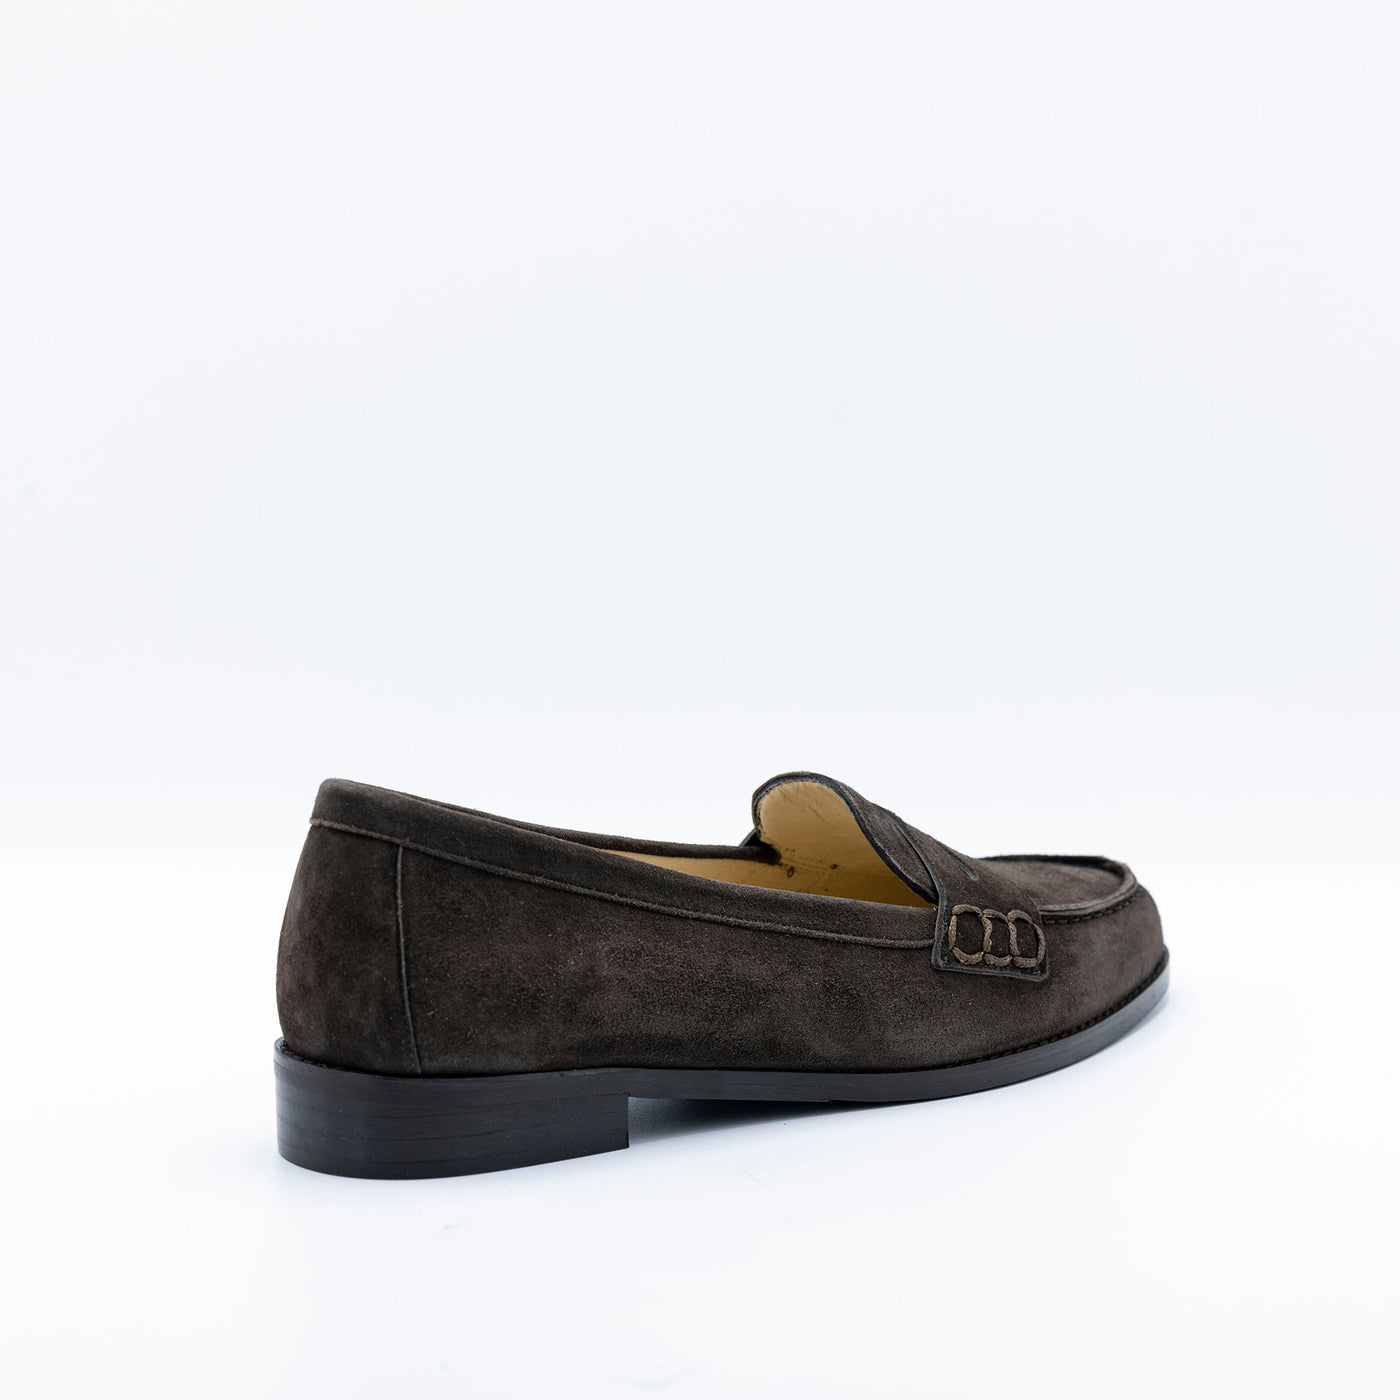 Classic Penny Loafer in Deep Brown suede. 